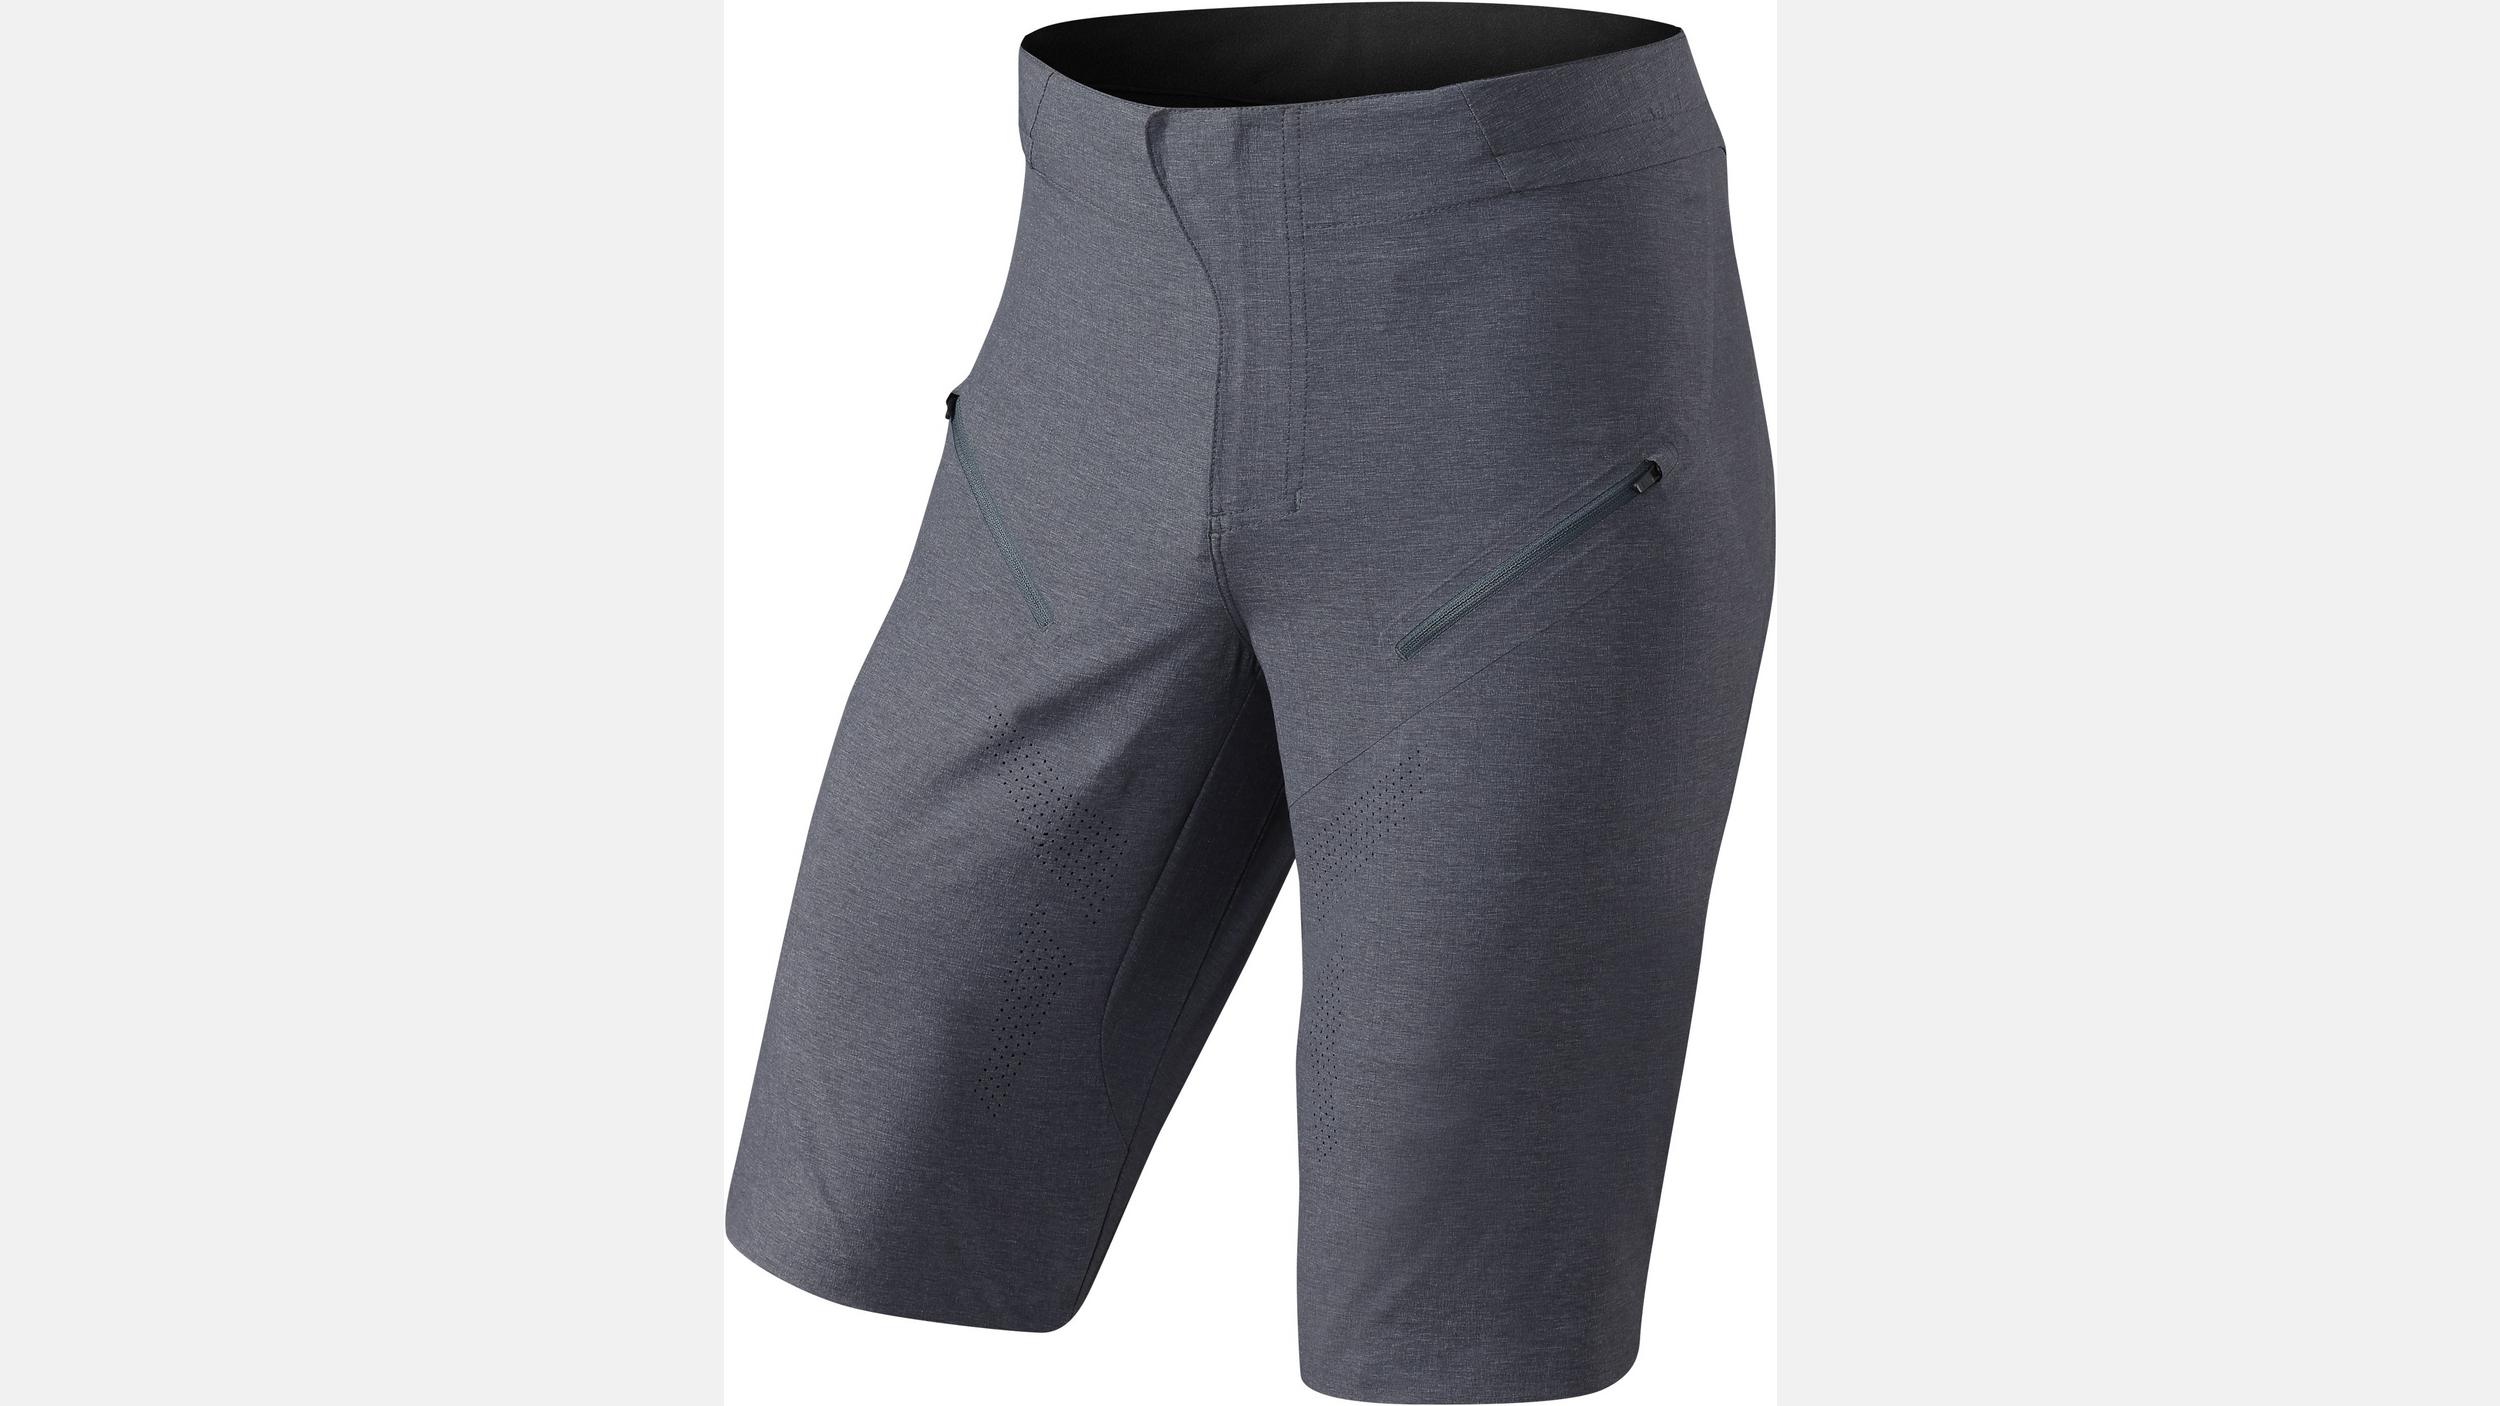 pollution complications Isaac Atlas Pro Shorts | Specialized.com